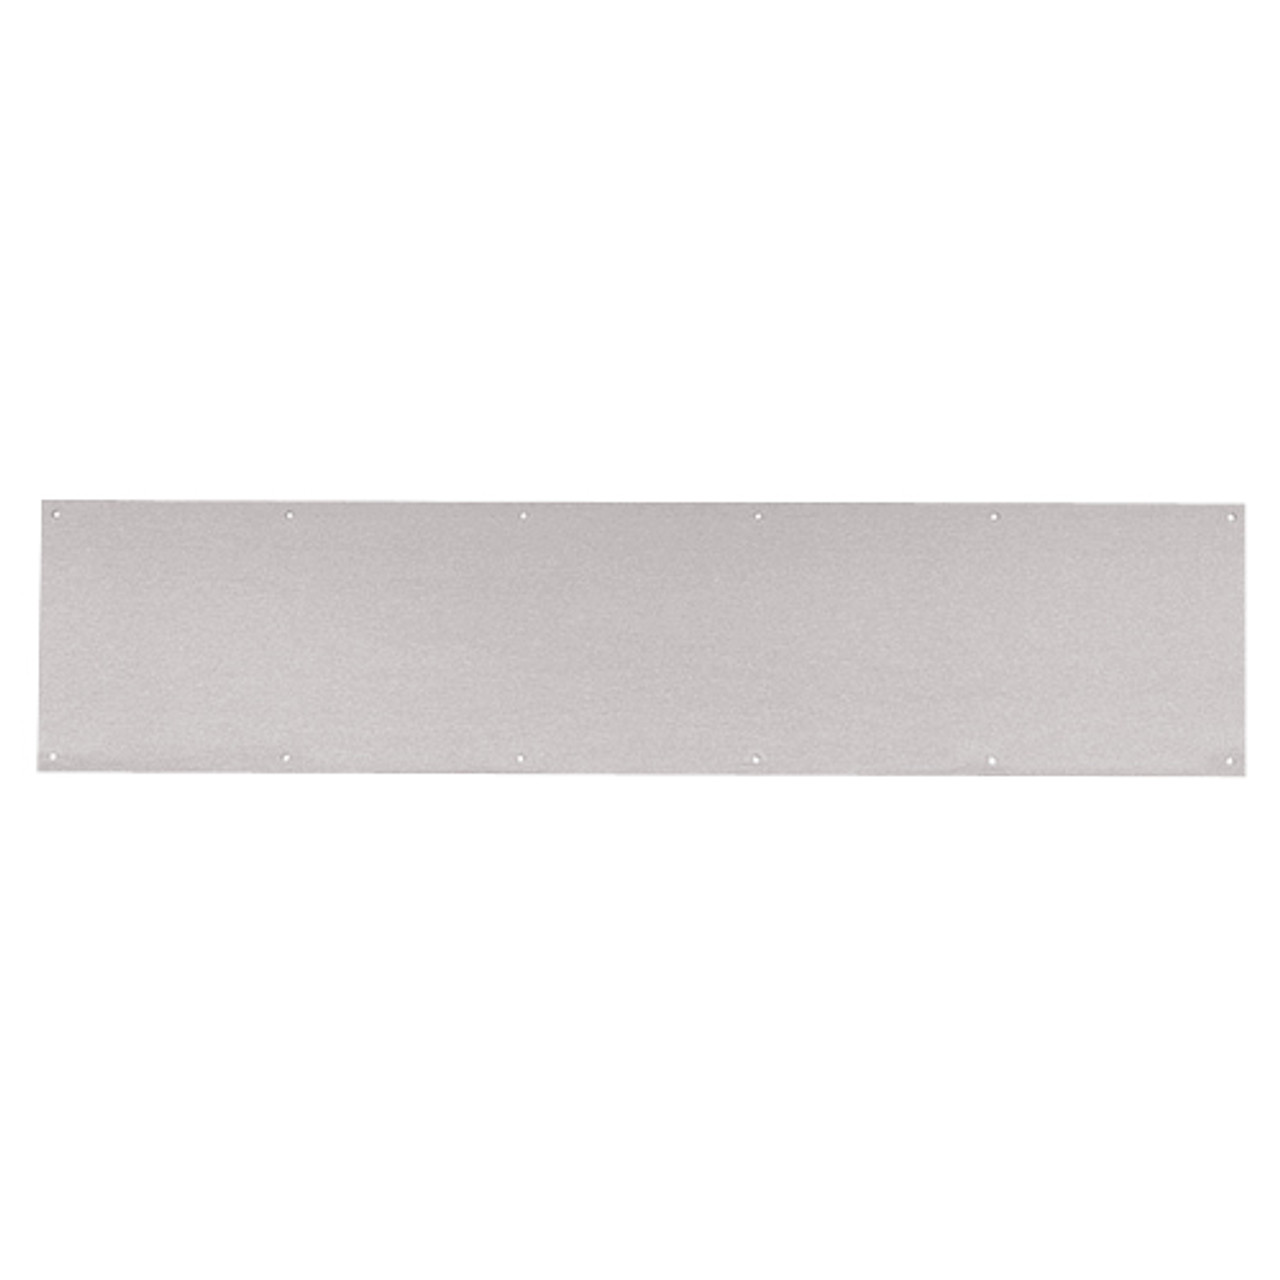 8400-US32D-10x27-B-CS Ives 8400 Series Protection Plate in Satin Stainless Steel